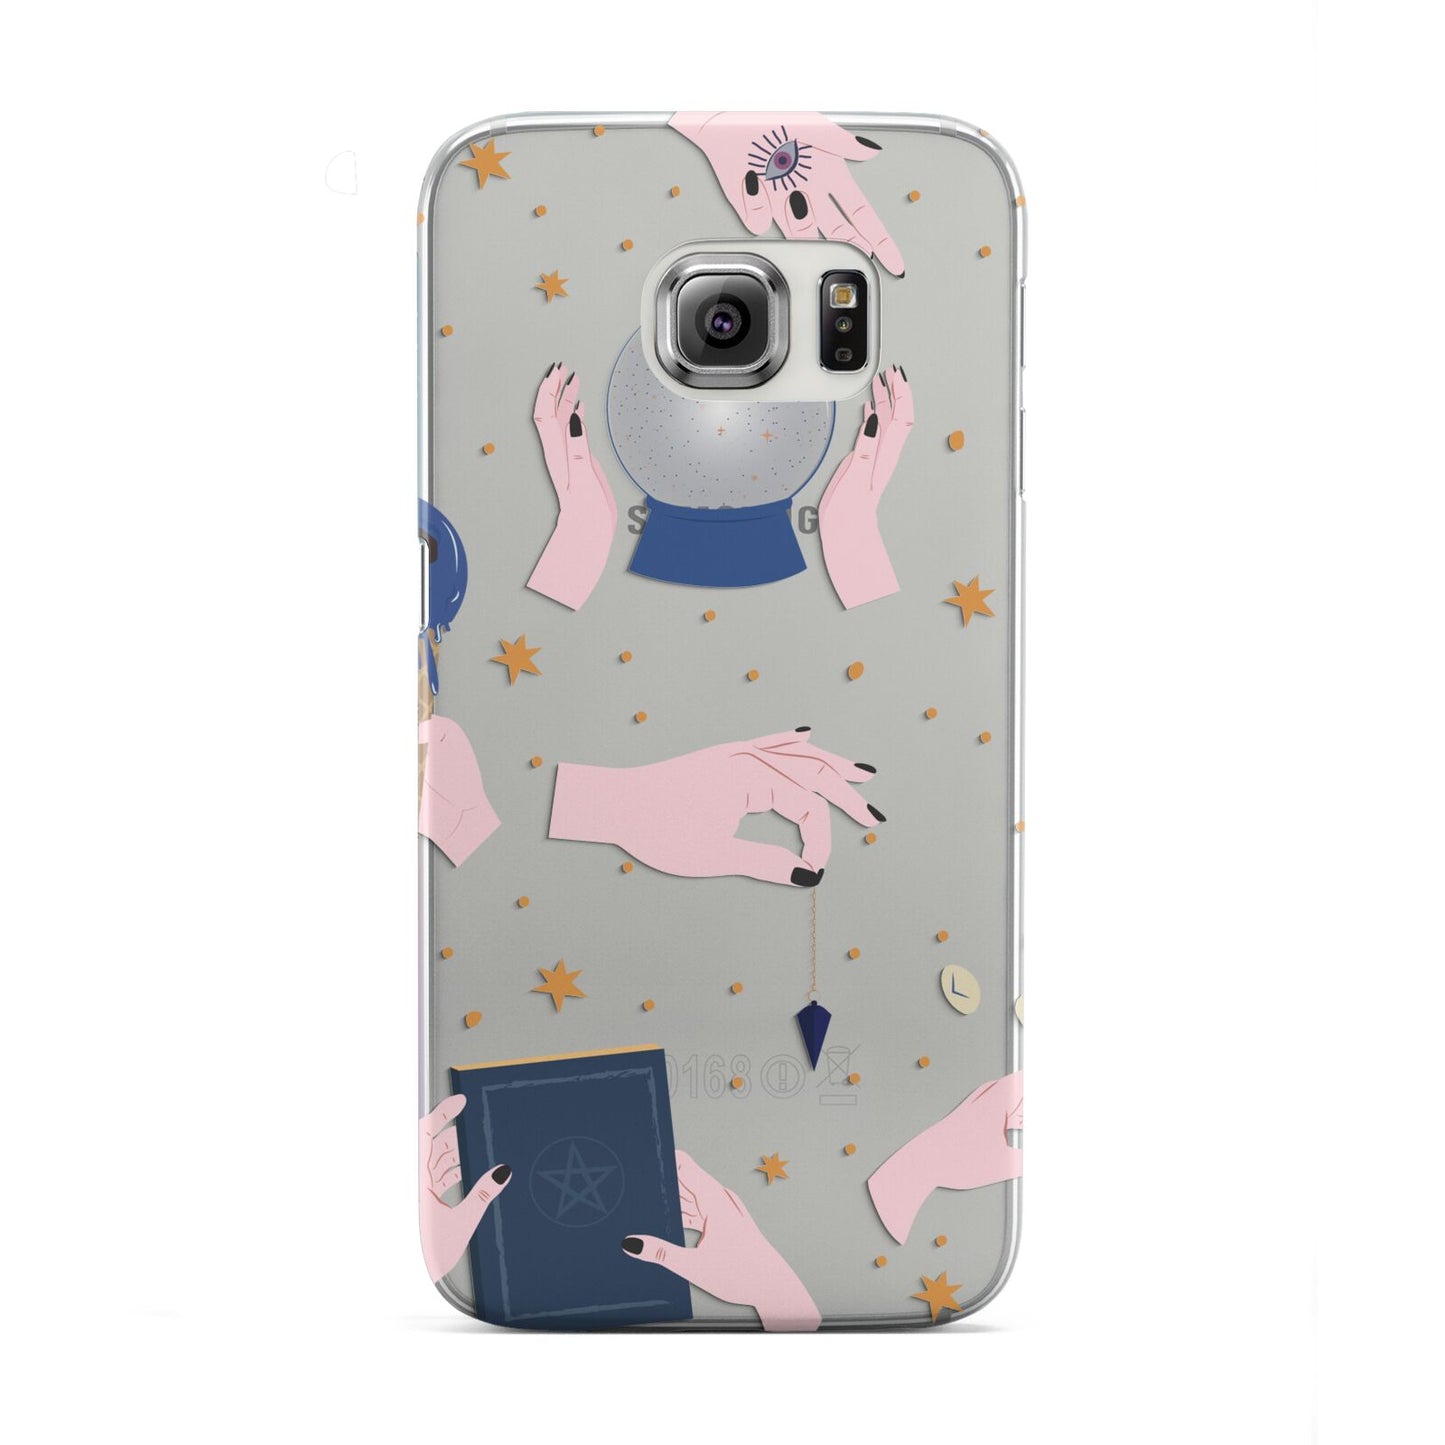 Clairvoyant Witches Hands Samsung Galaxy S6 Edge Case